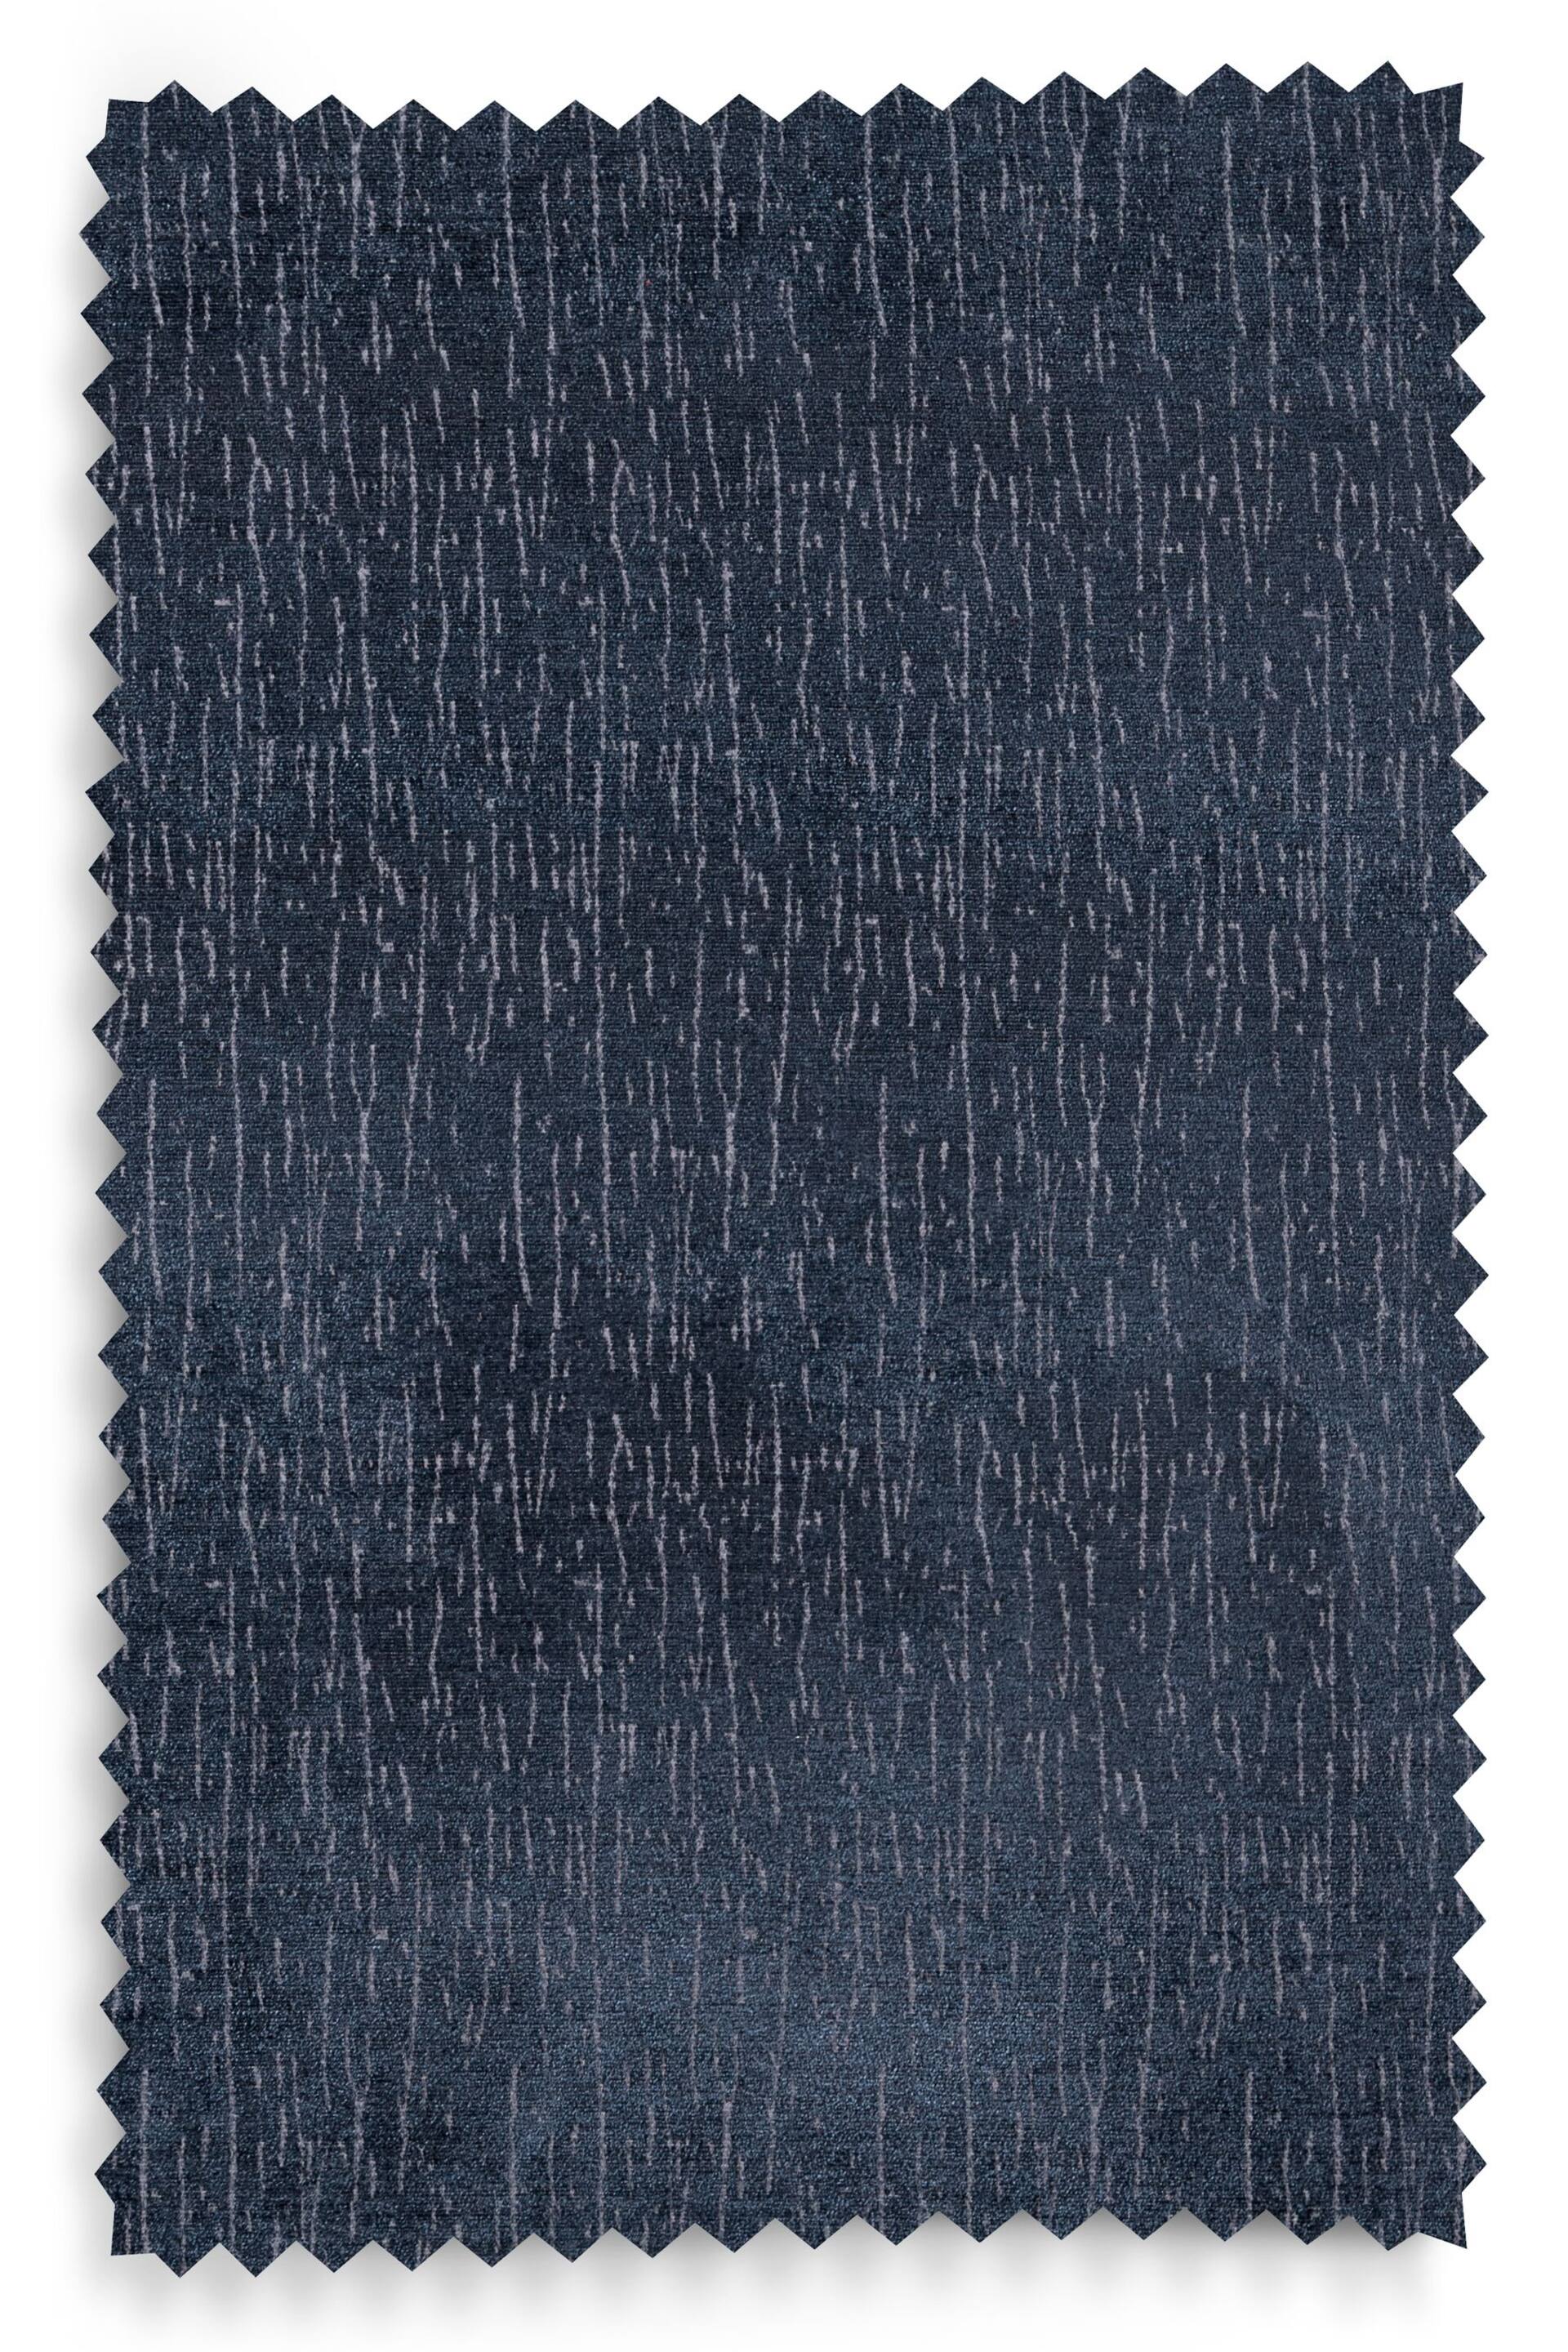 Navy Blue Next Heavyweight Chenille Eyelet Lined Curtains - Image 6 of 6